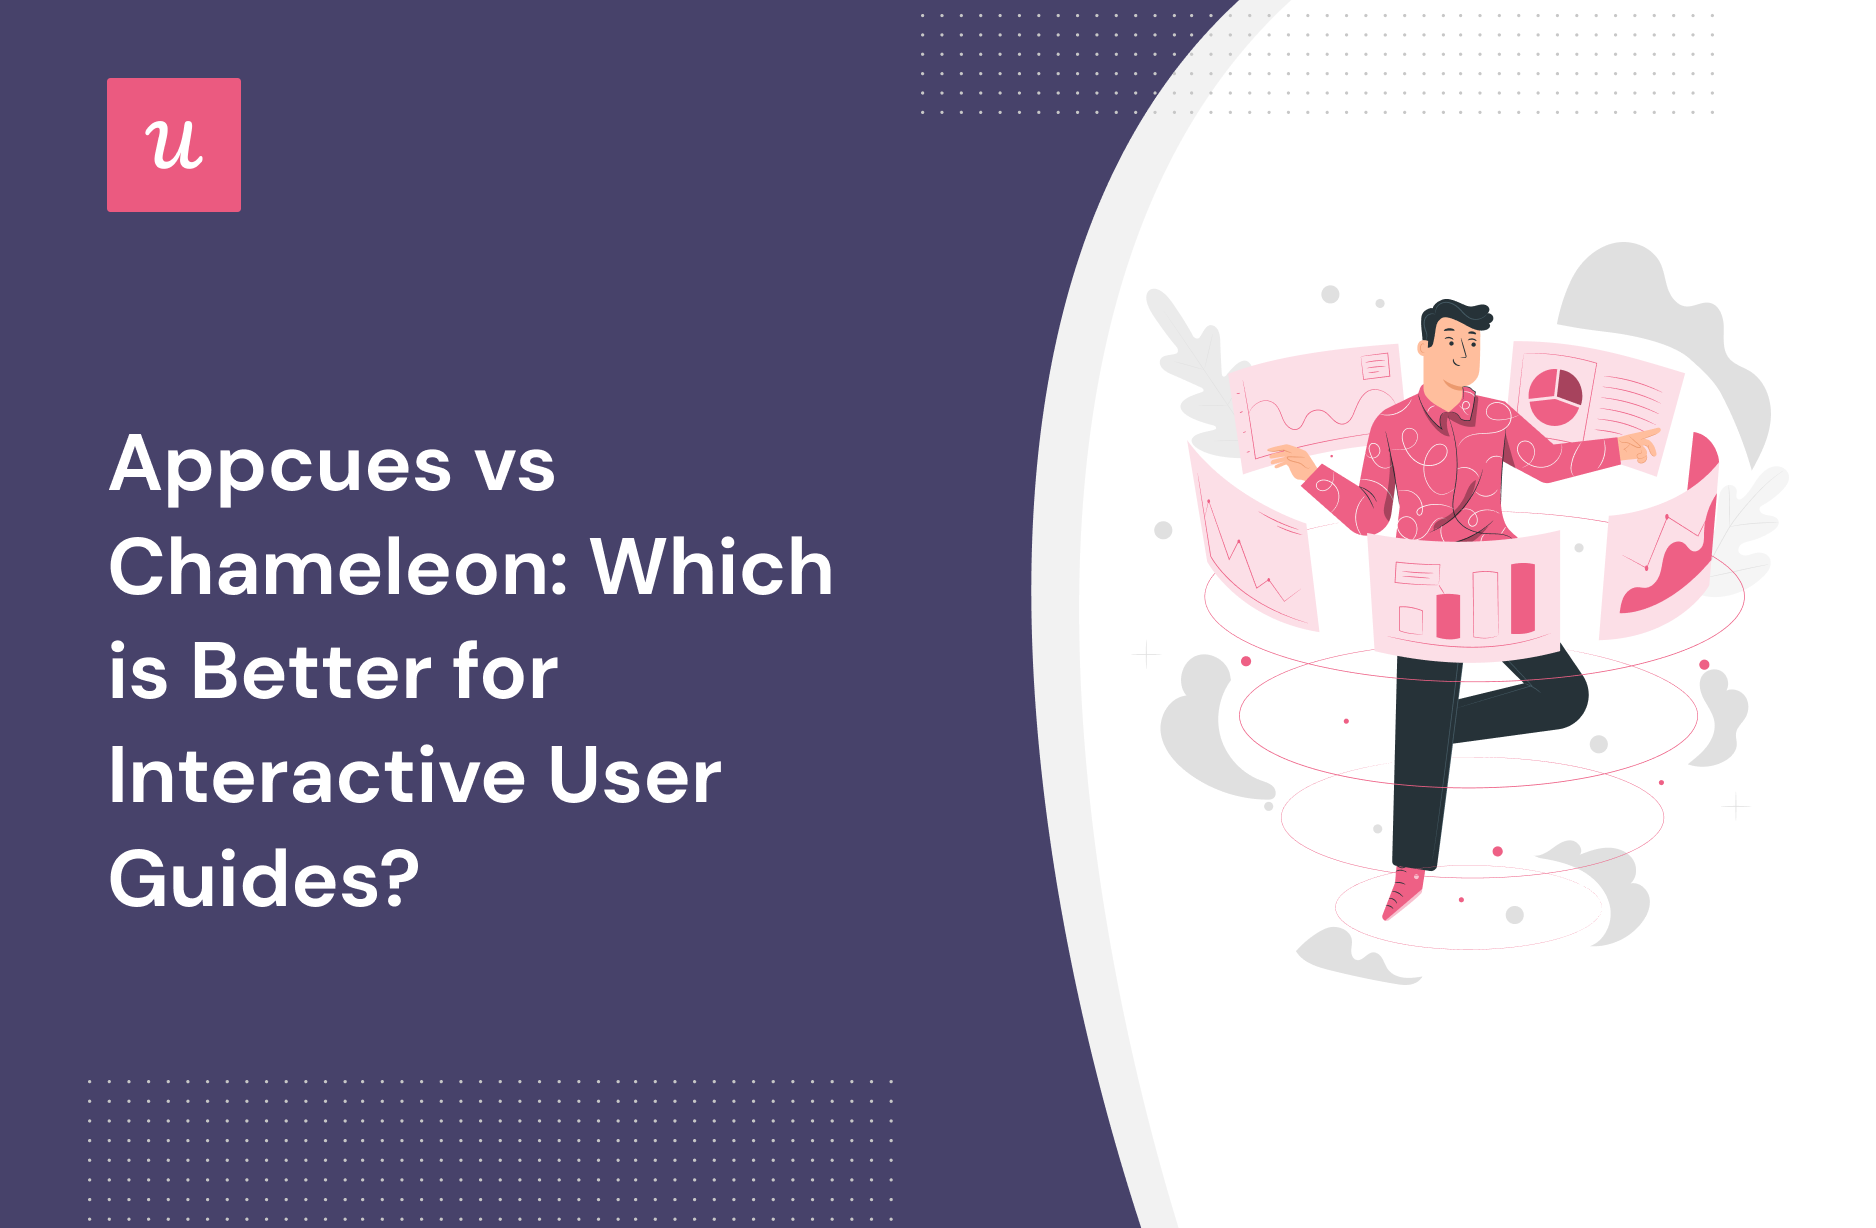 Appcues vs Chameleon: Which is Better for Interactive User Guides?